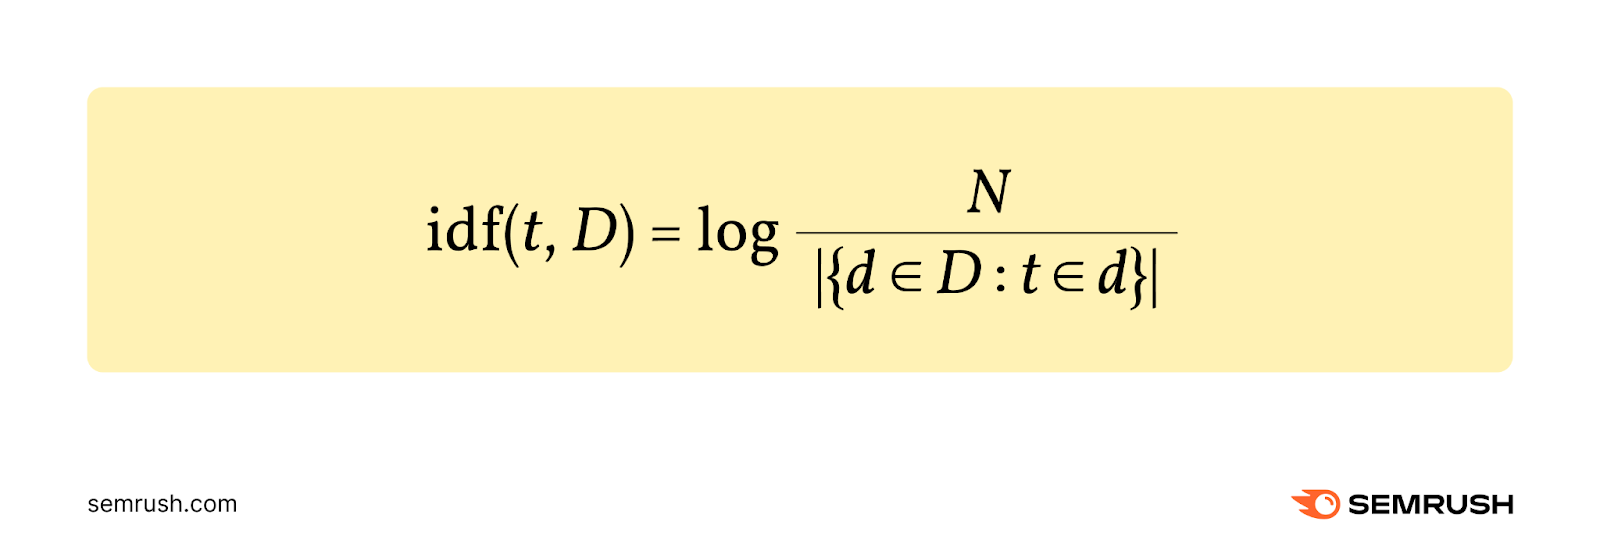 Inverse document frequency (IDF) formula